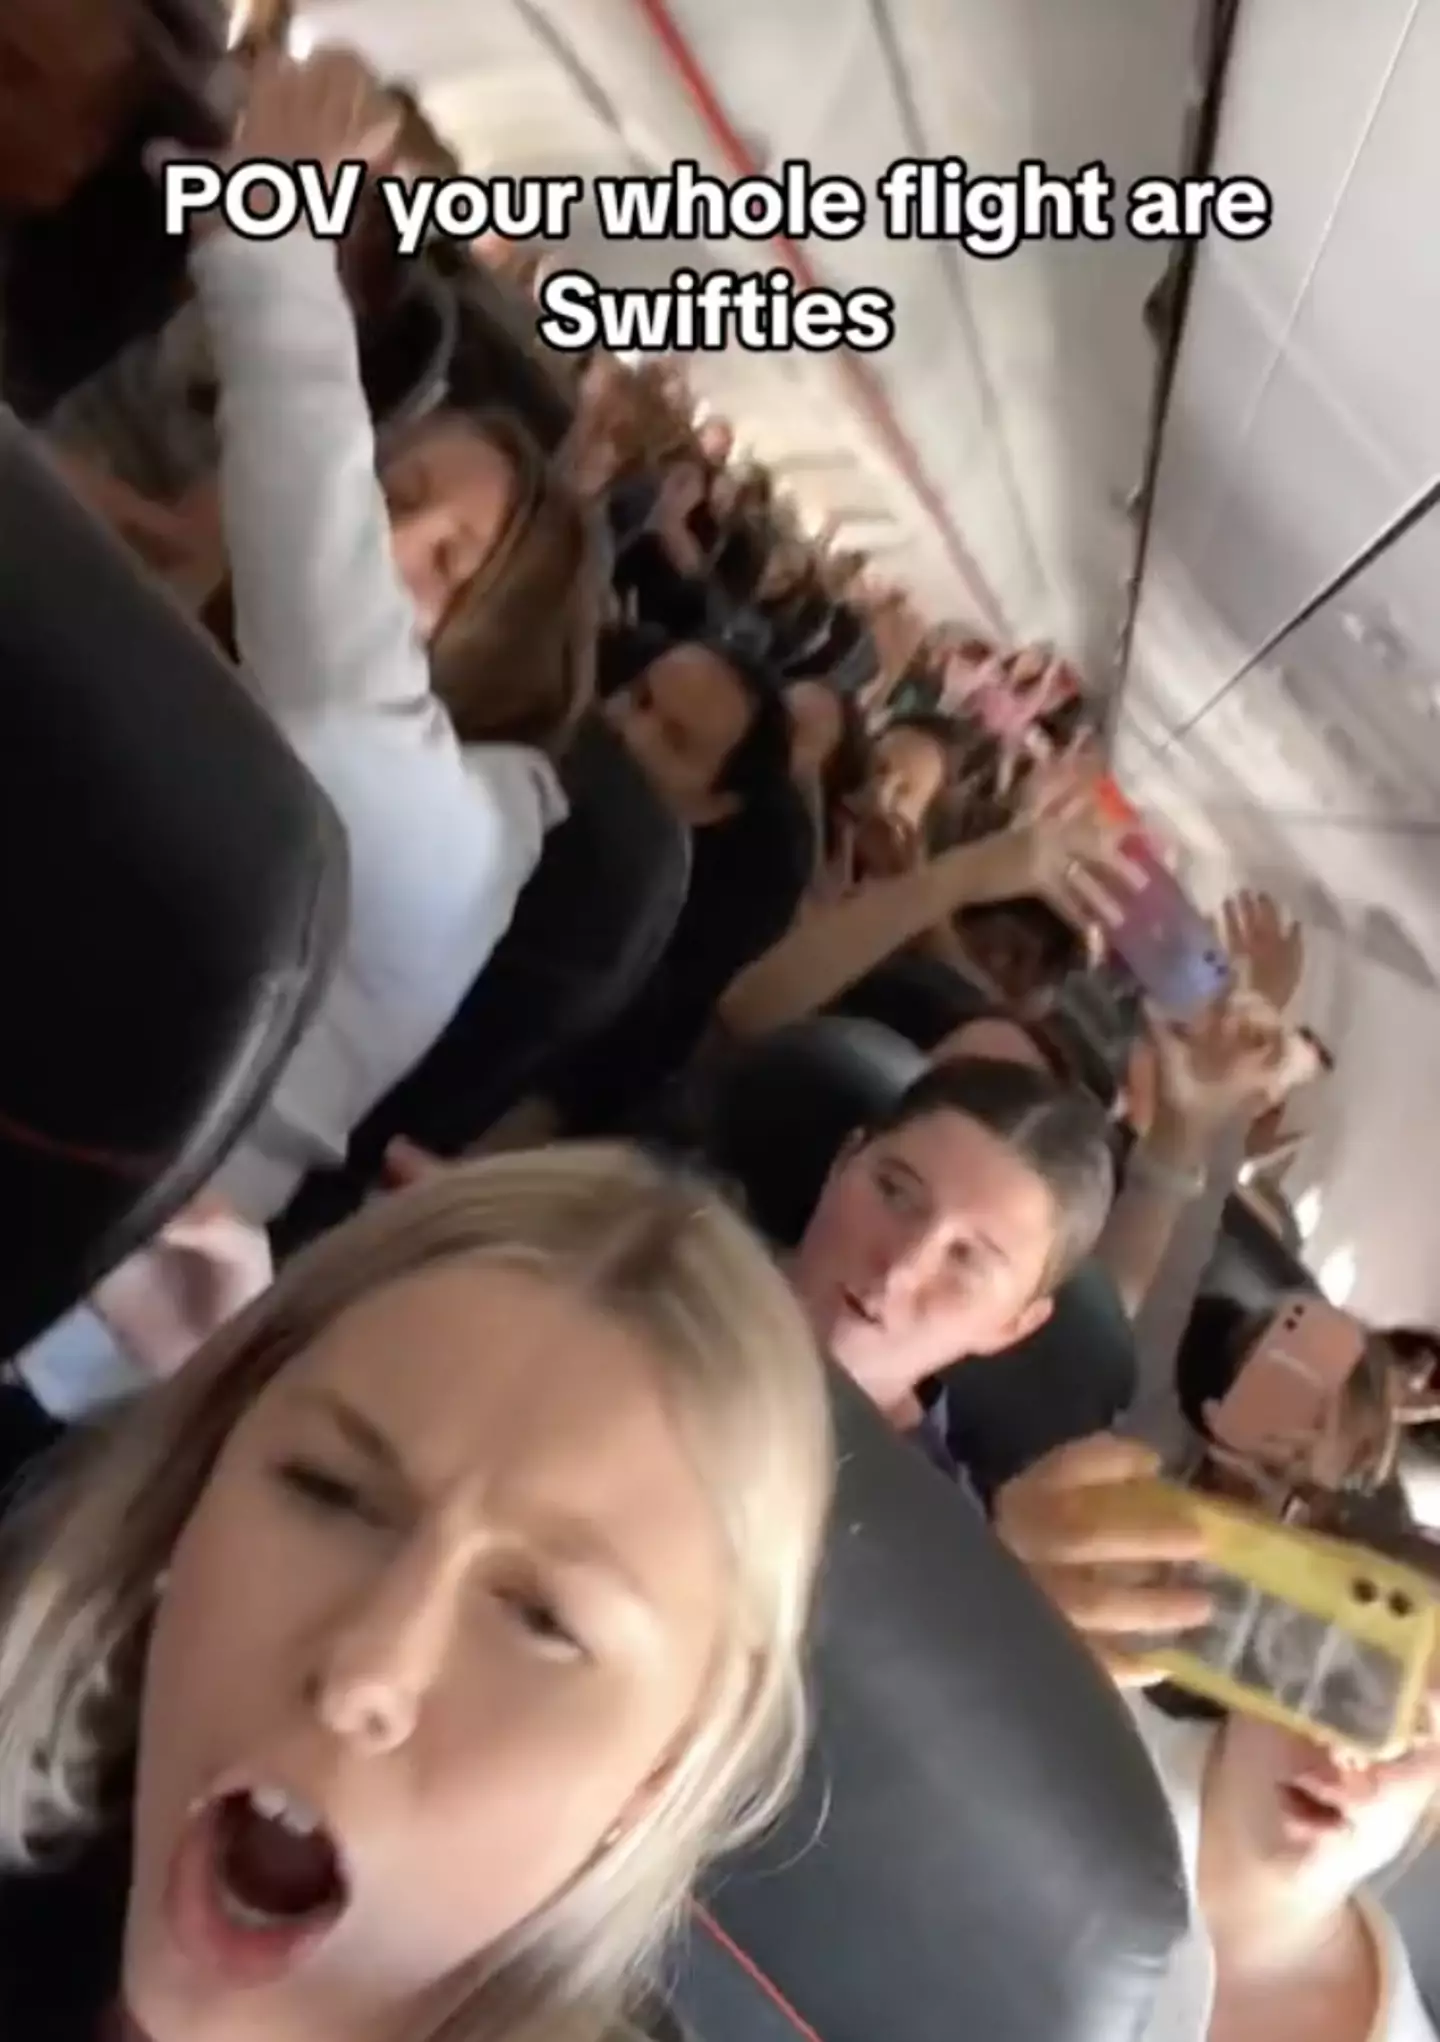 The viral video shows a group of Swifties essentially having an impromptu concert during a flight.